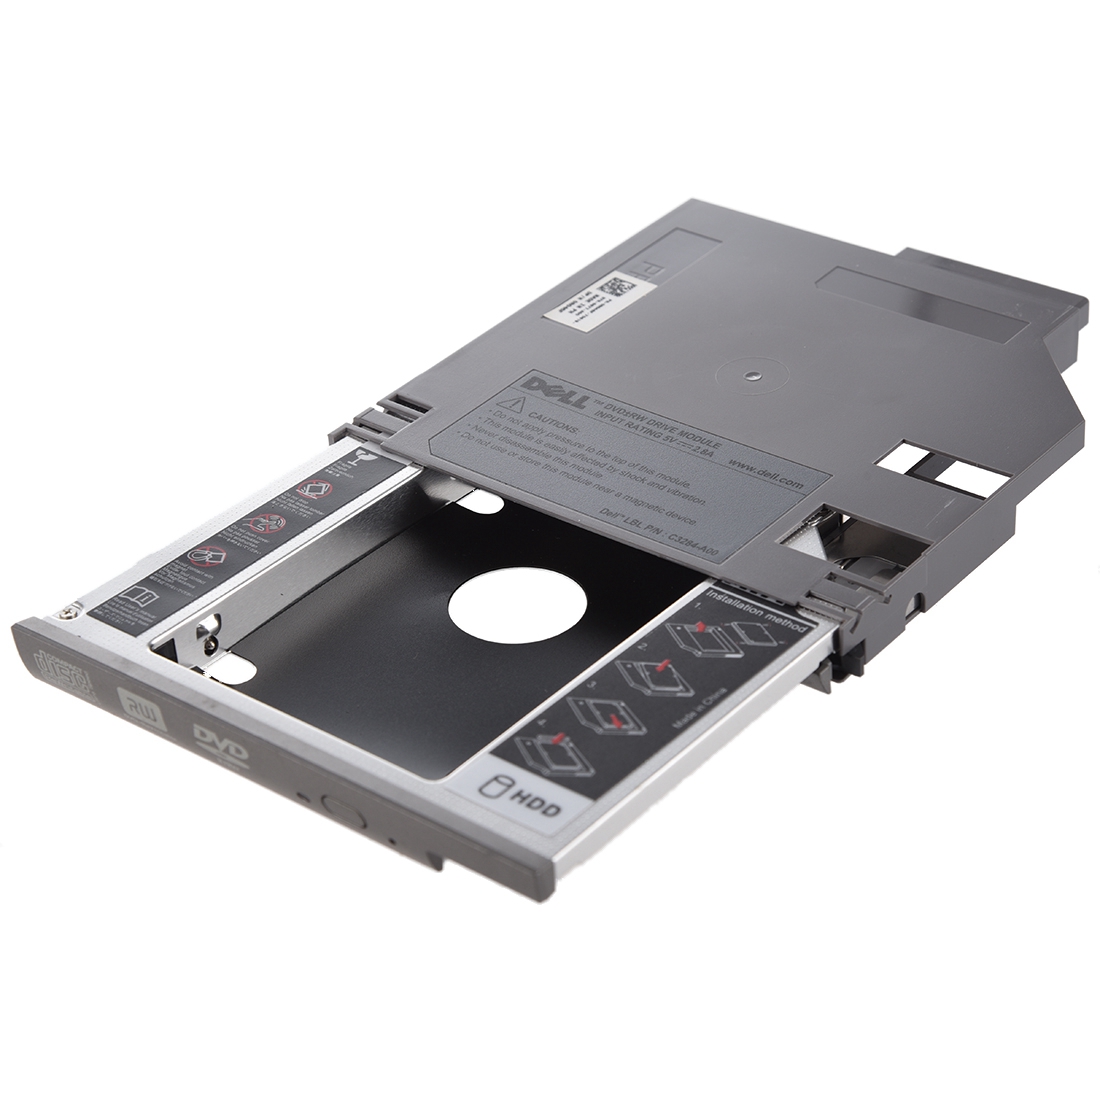 SATA 2nd Hard Disk Drive HDD Bay Caddy Adapter for Dell Latitude D600 D610 D620 D630 Silver